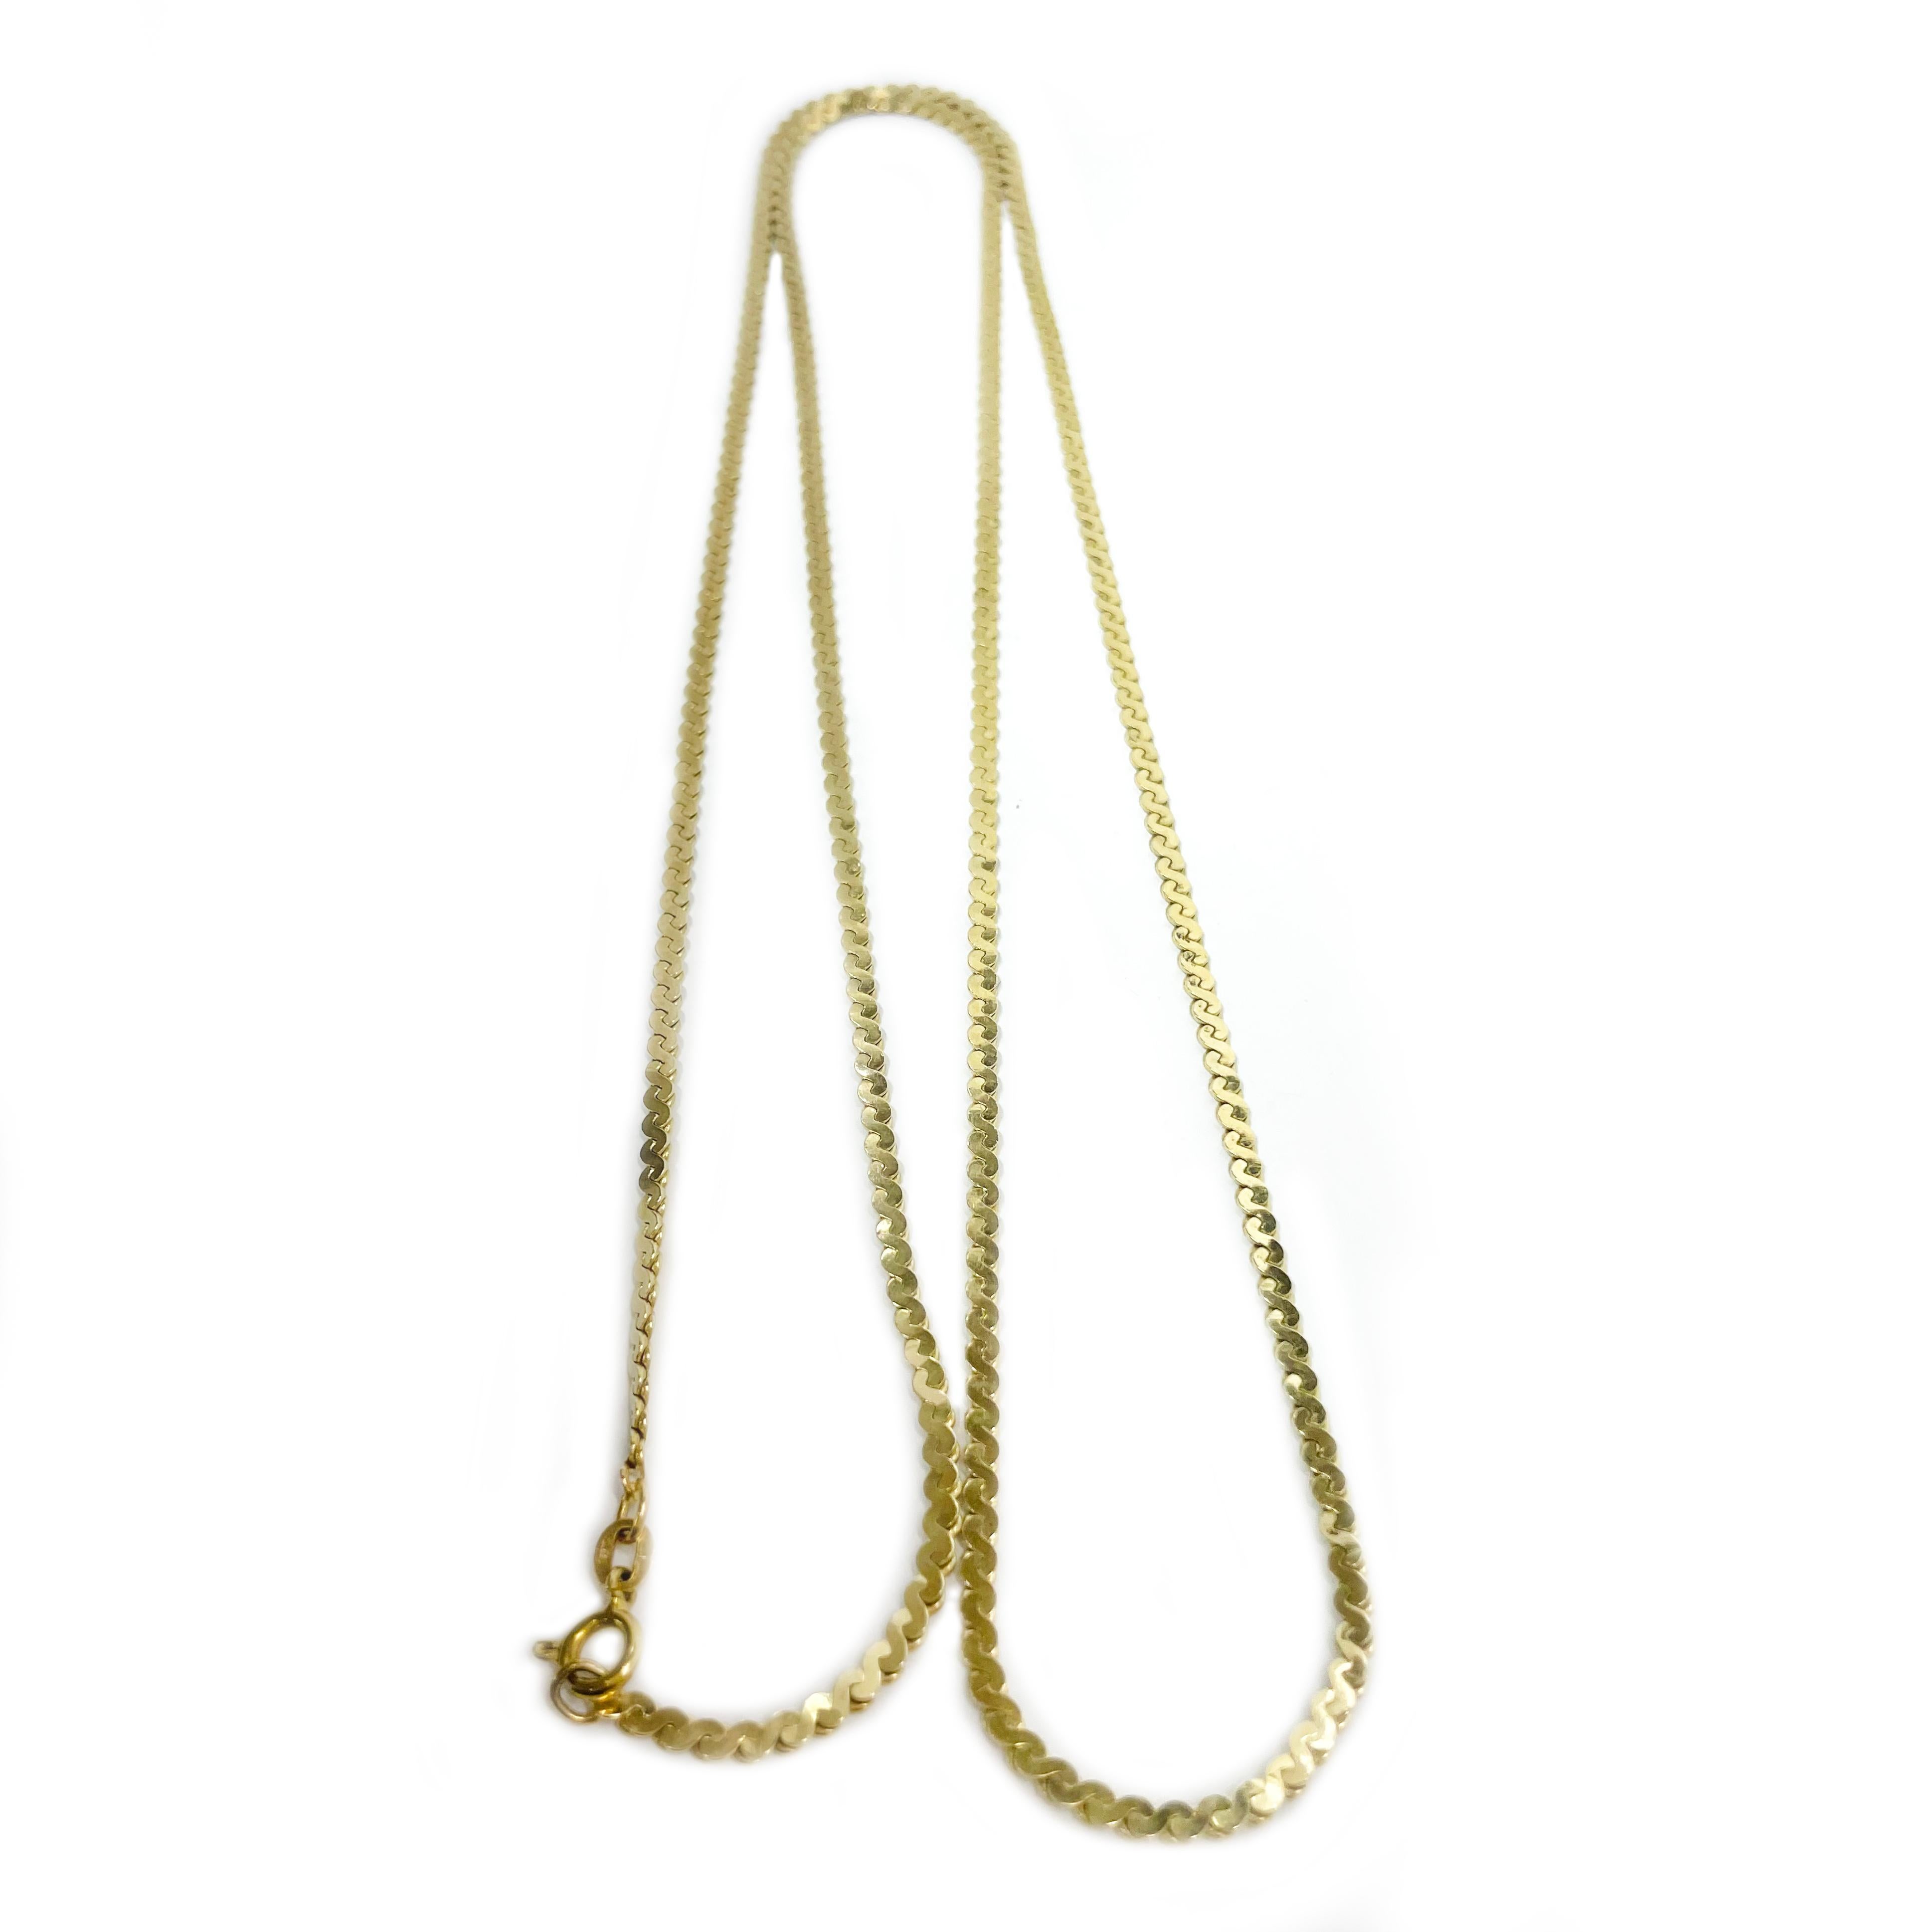 14 Karat Yellow Gold Serpentine Chain Necklace. The old-style chain is 2.5mm wide and rope length 33